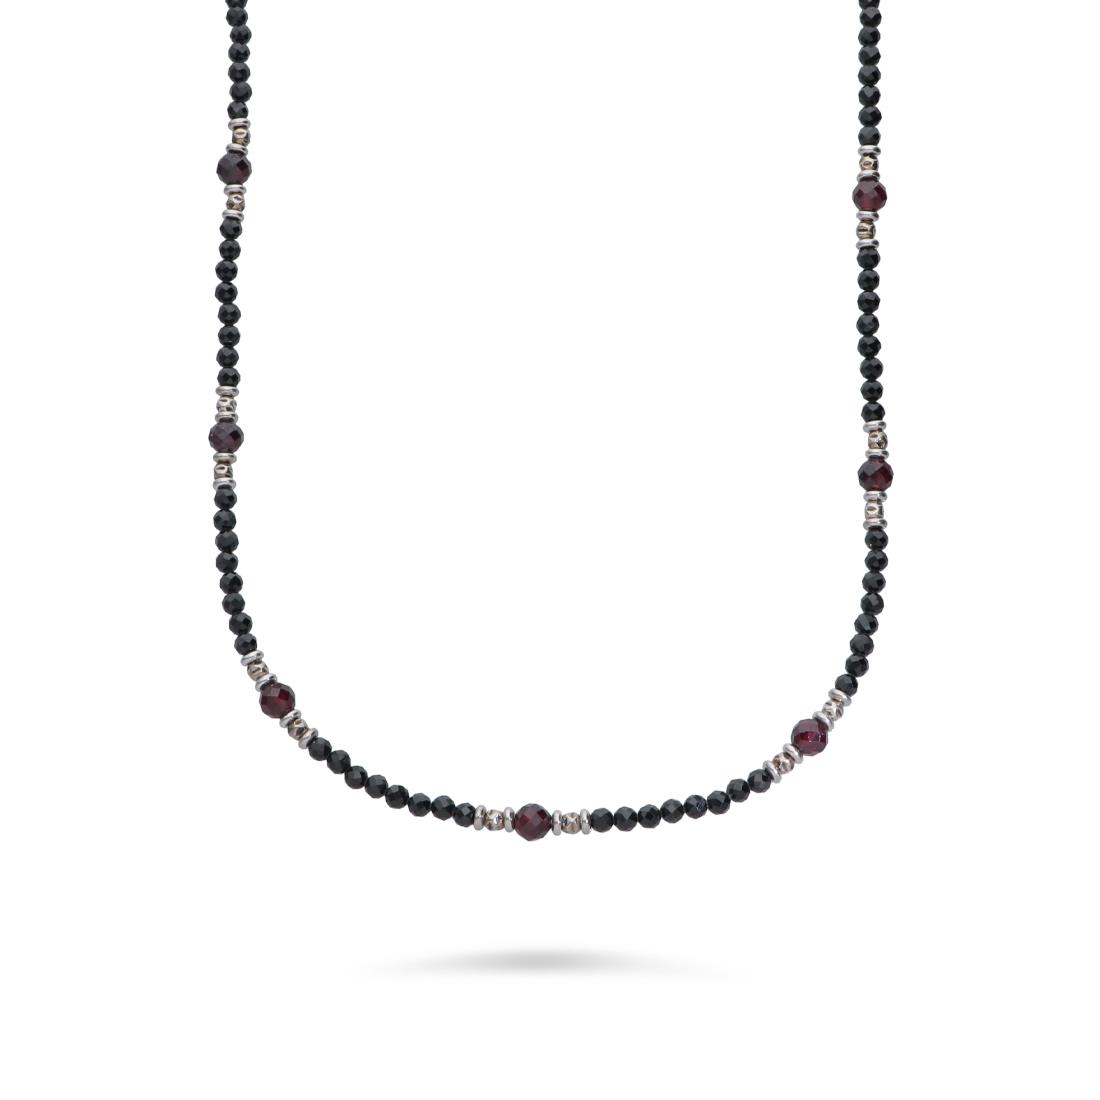 Long men's necklace in silver with spinel and garnet - ALFIERI & ST. JOHN 925